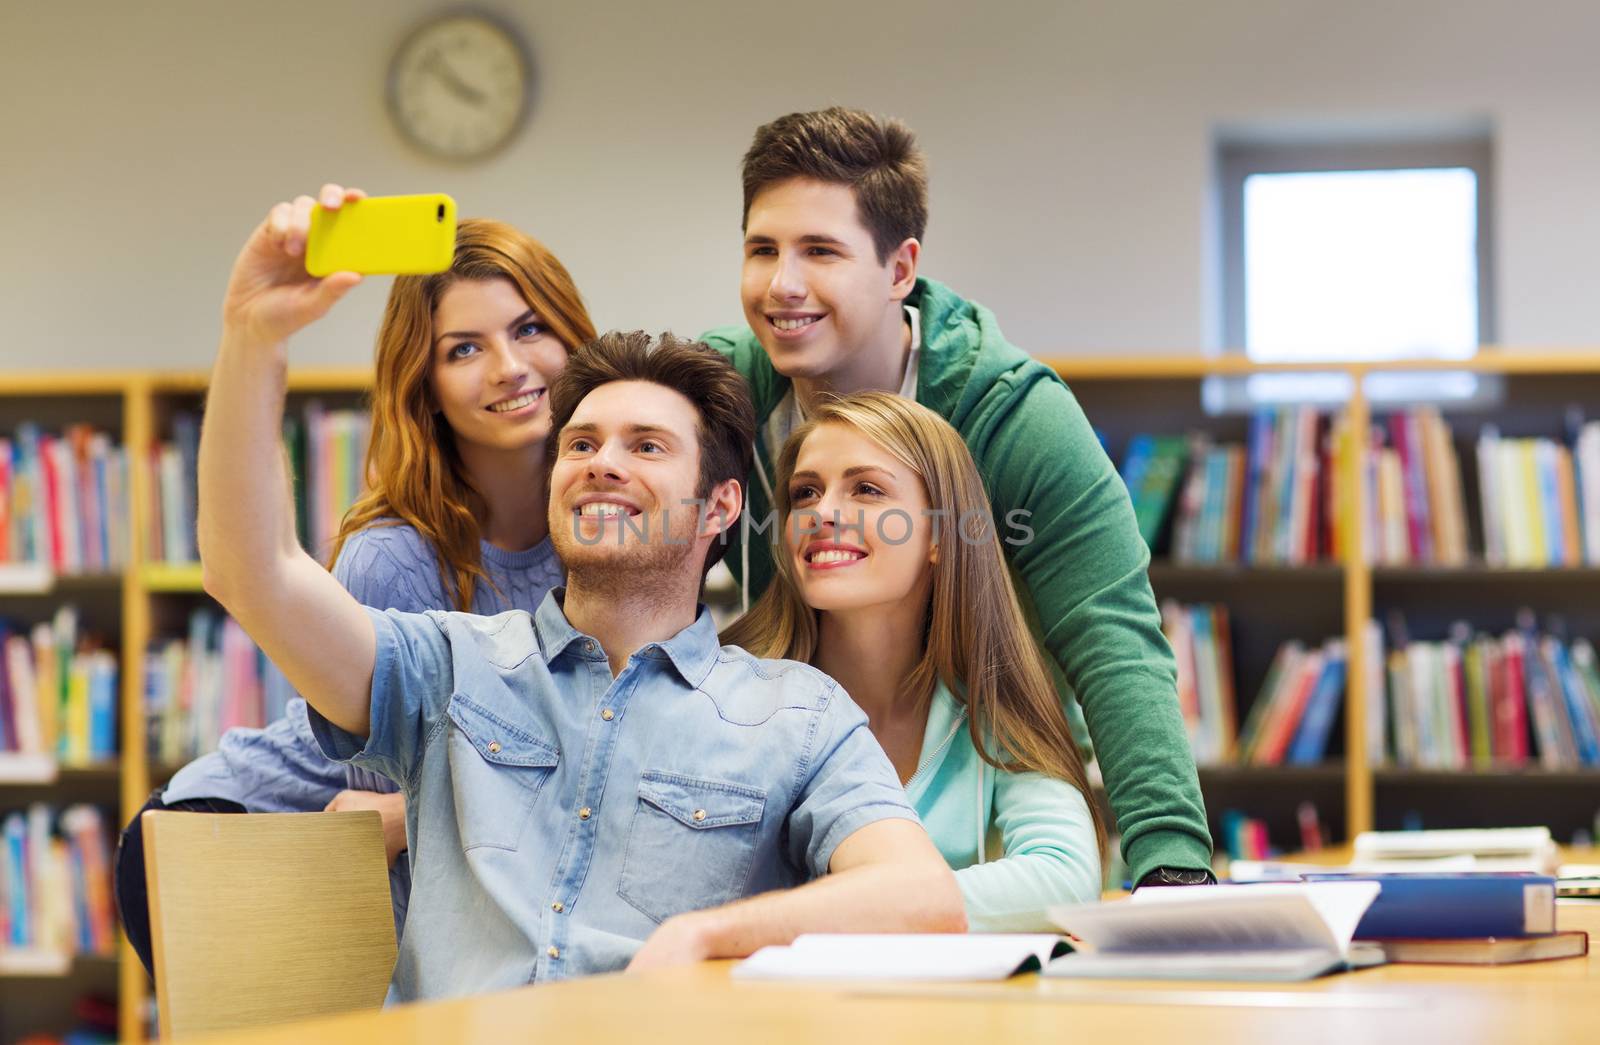 students with smartphone taking selfie in library by dolgachov